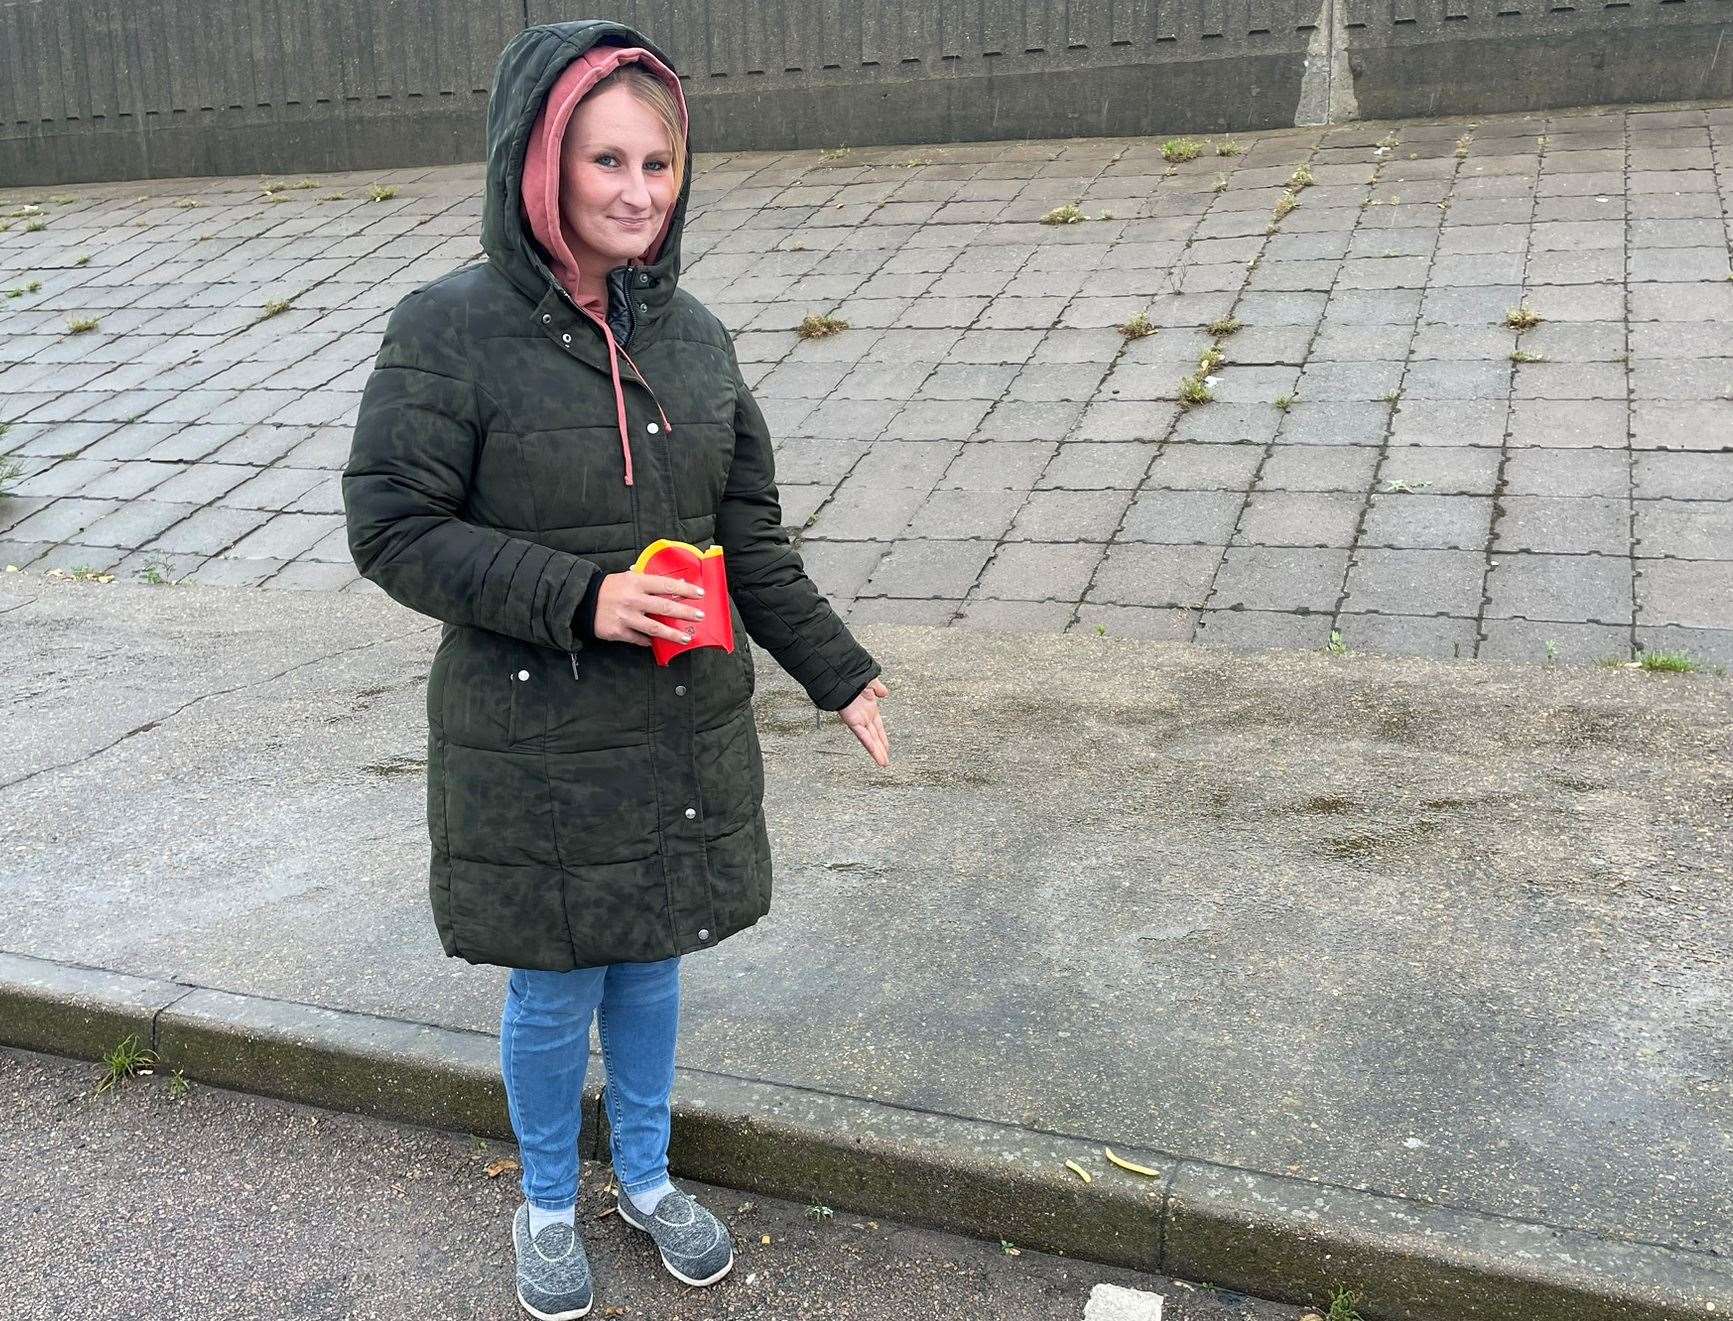 Jacqueline Clarke, from Queenborough, was fined £200 after dropping chips outside Tesco car park in Sheerness. Picture: Joe Crossley